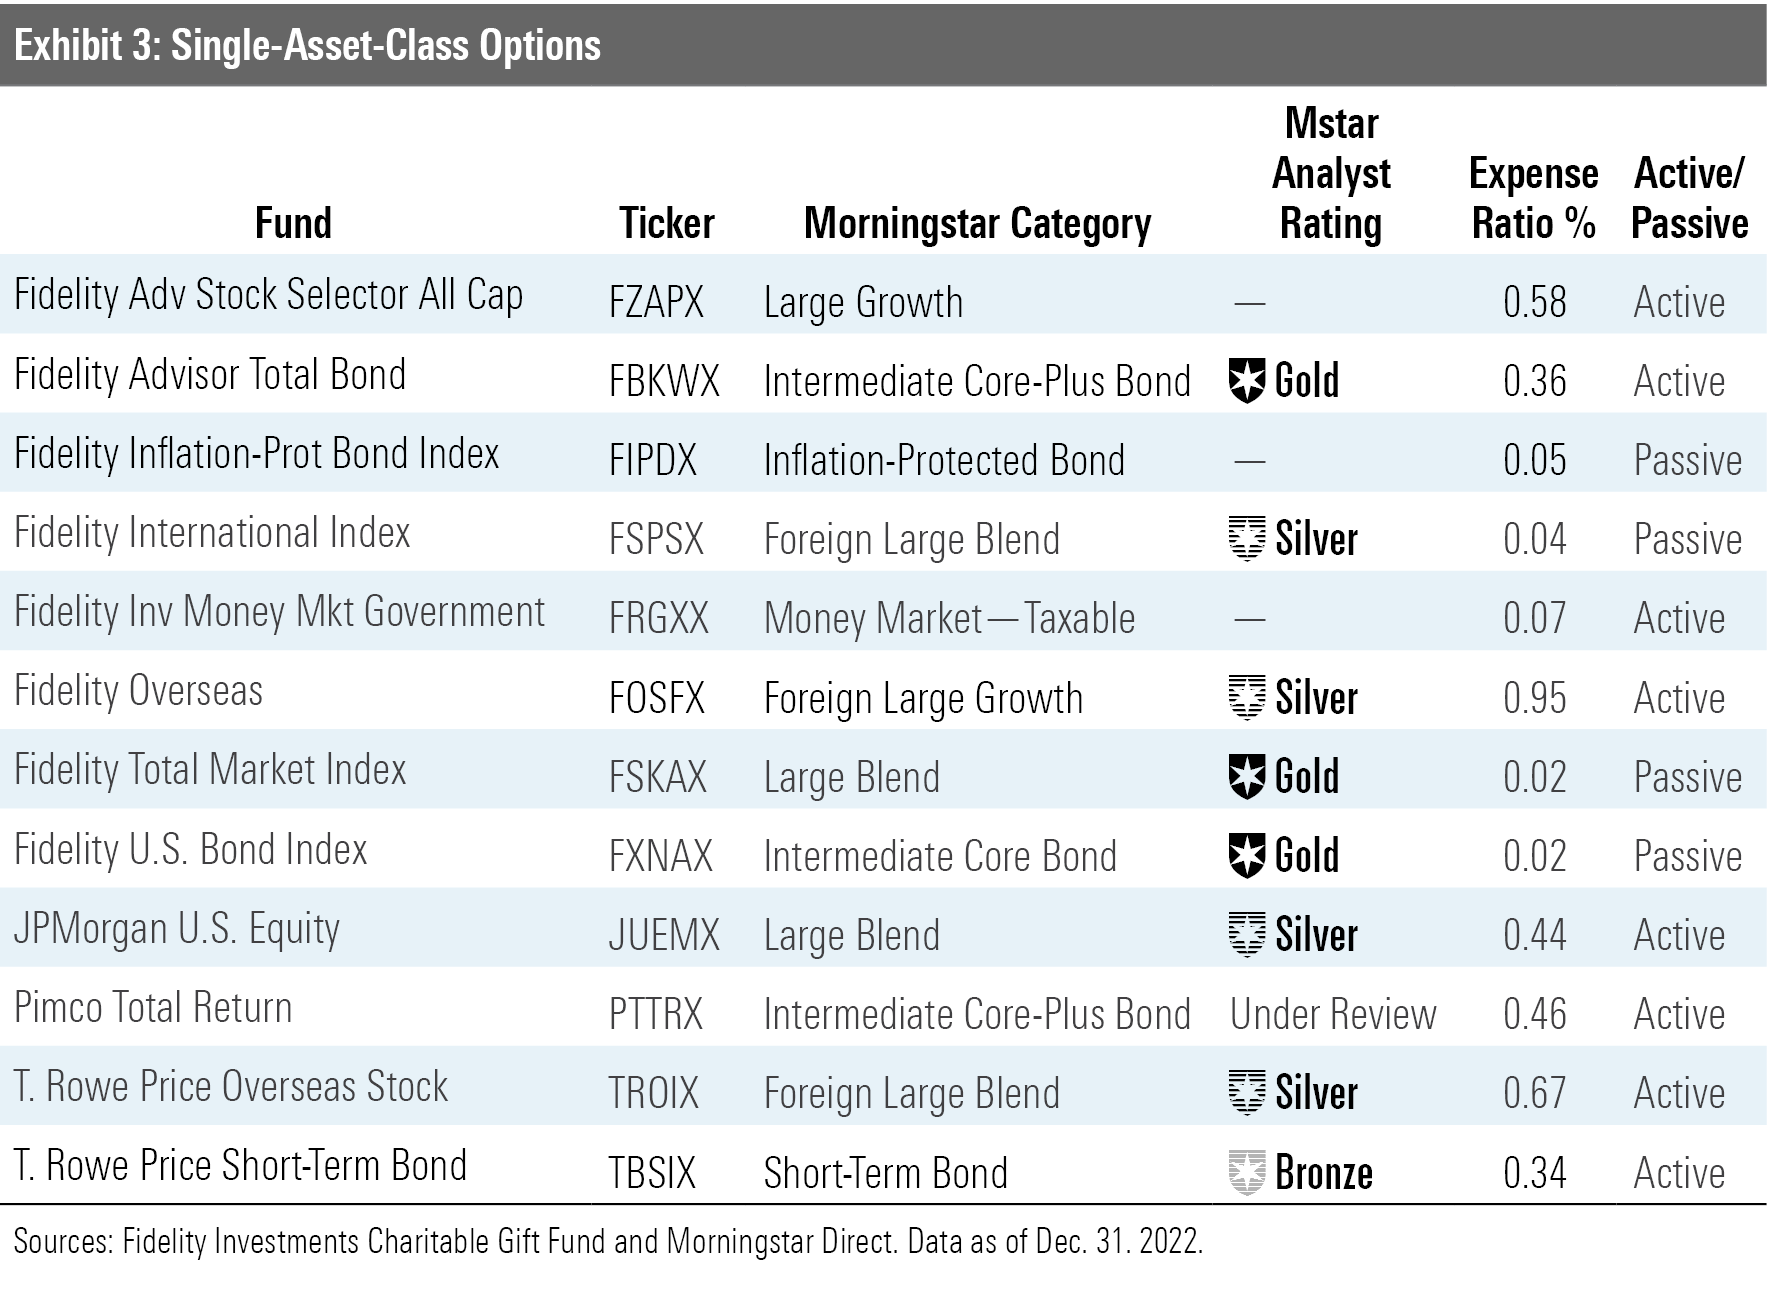 A table showing the single asset-class investment options available in the Fidelity Charitable program.